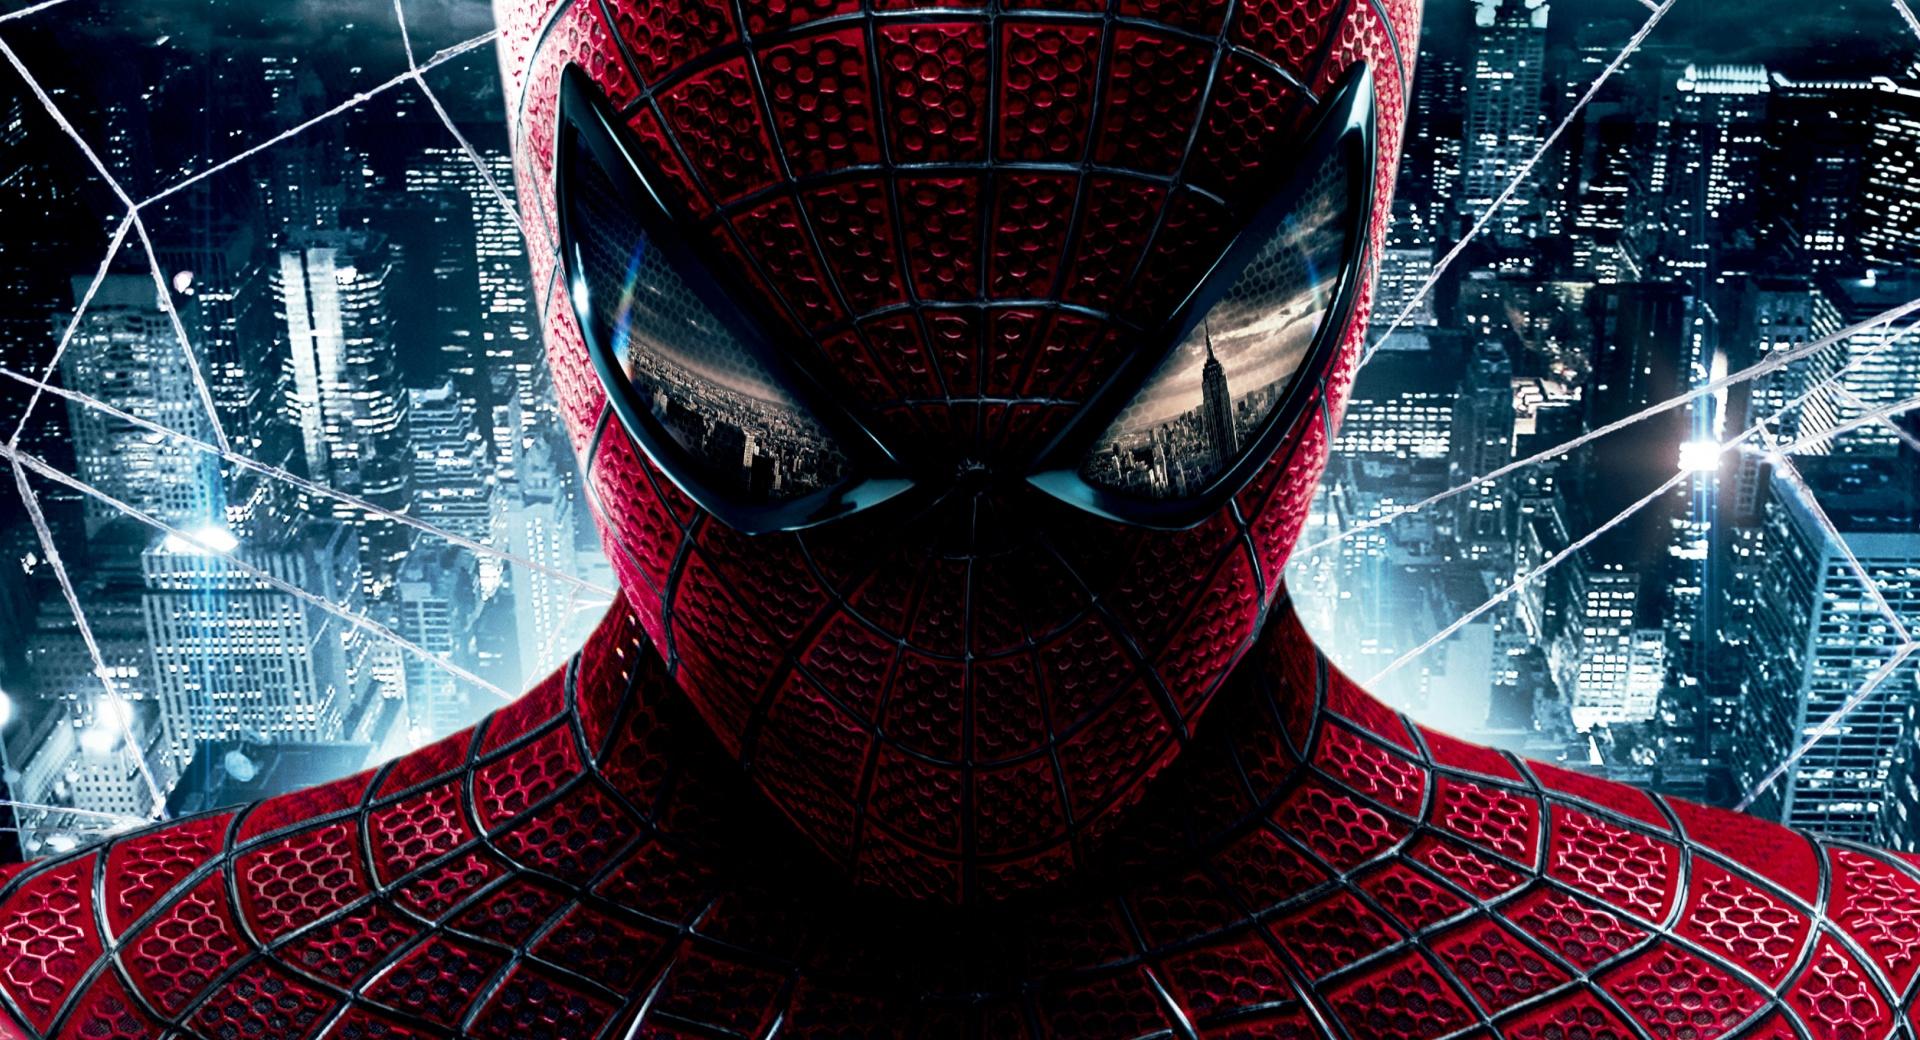 The Amazing Spiderman (2012) wallpapers HD quality